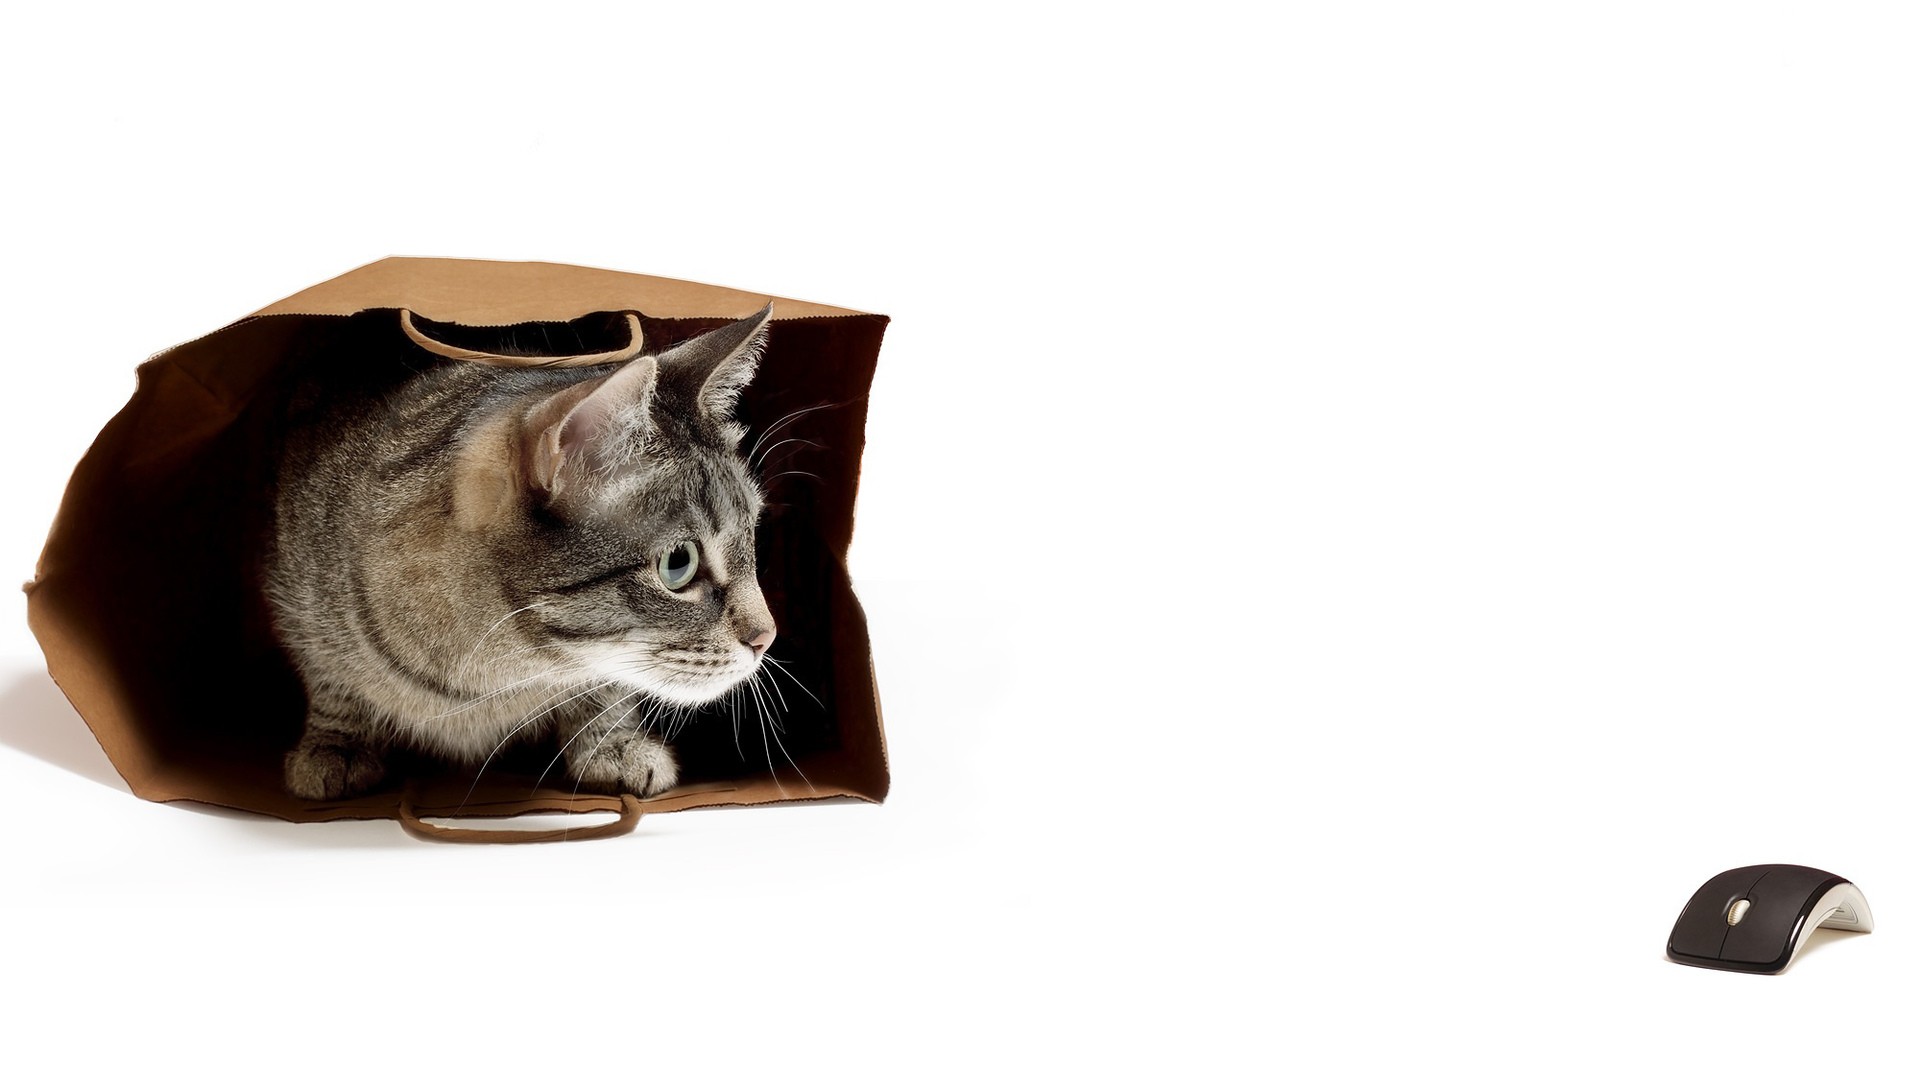 General 1920x1080 white background animals cats pet bag computer mice humor mammals simple background